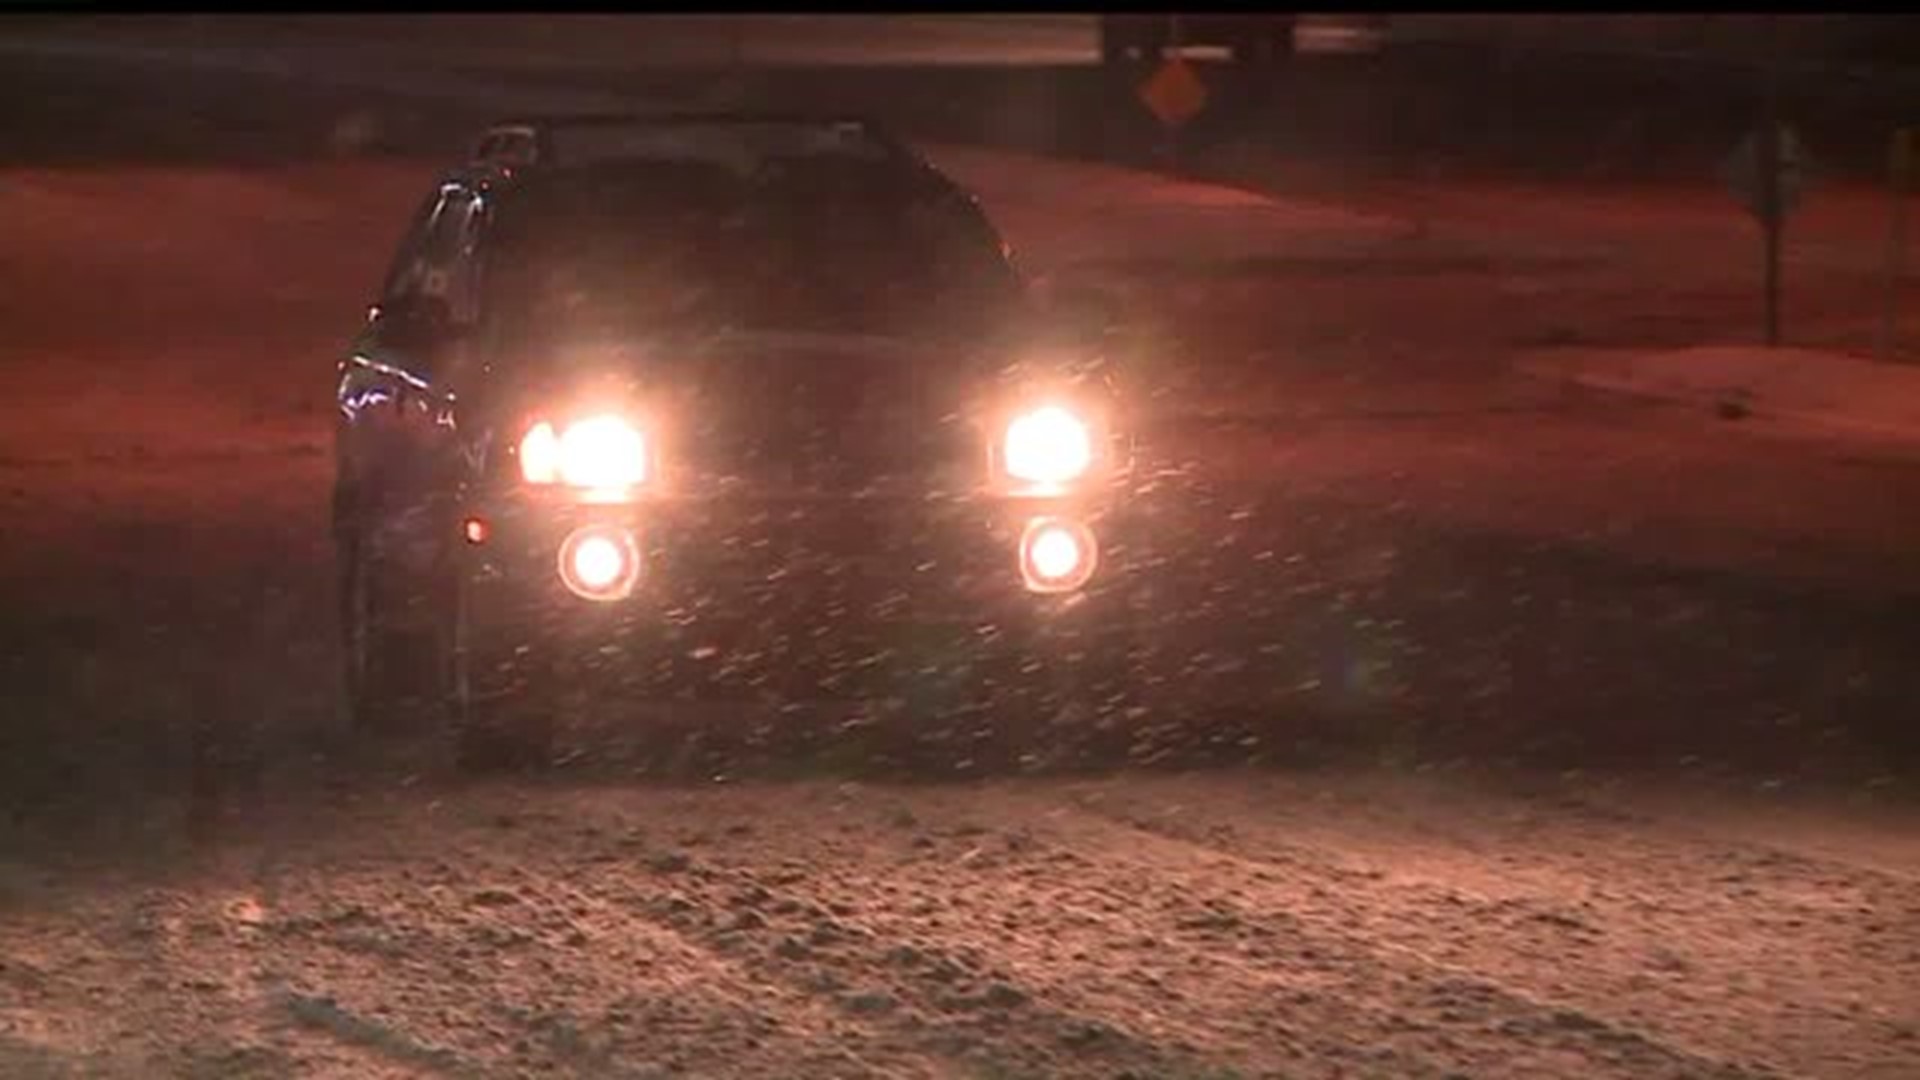 More winter weather causes messy commute